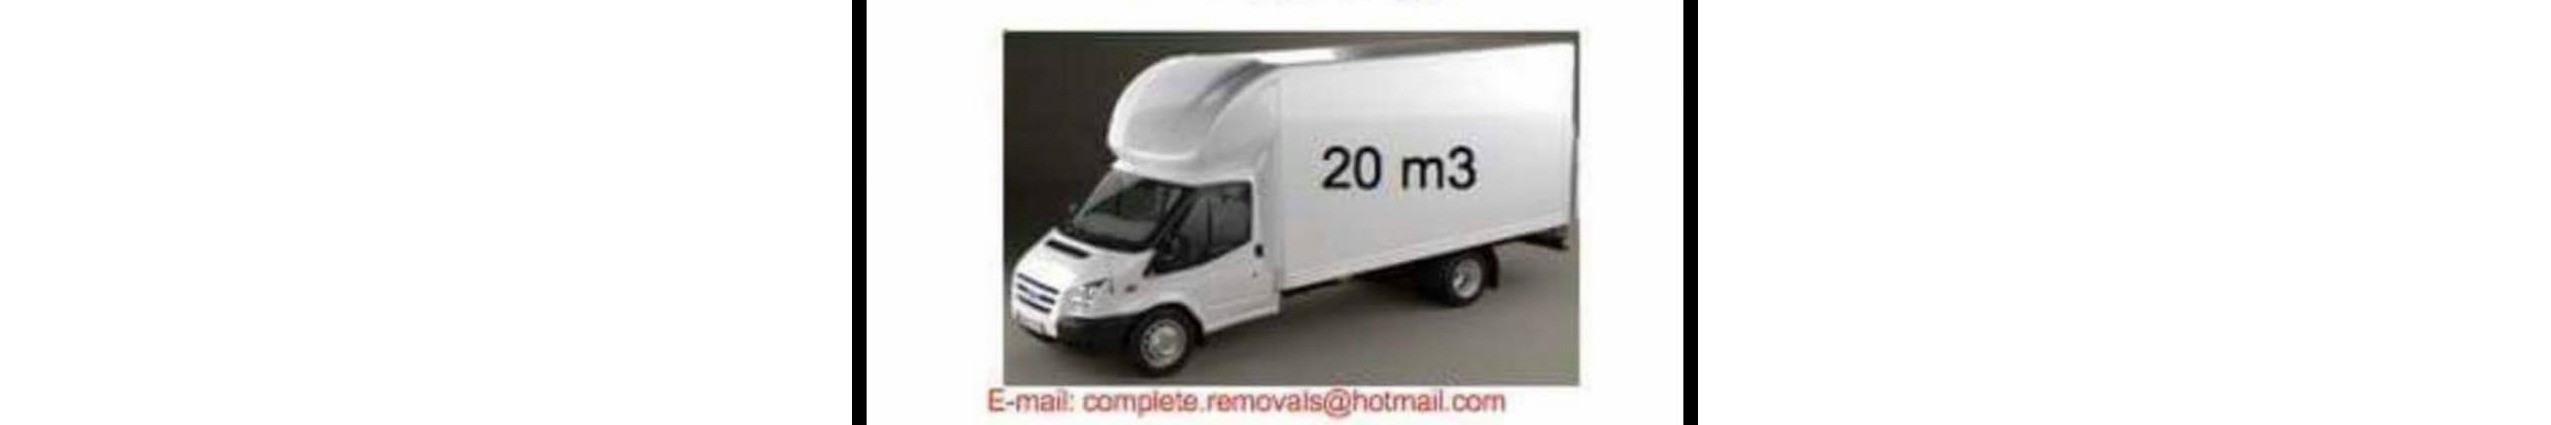 Complete Removals - Removal services